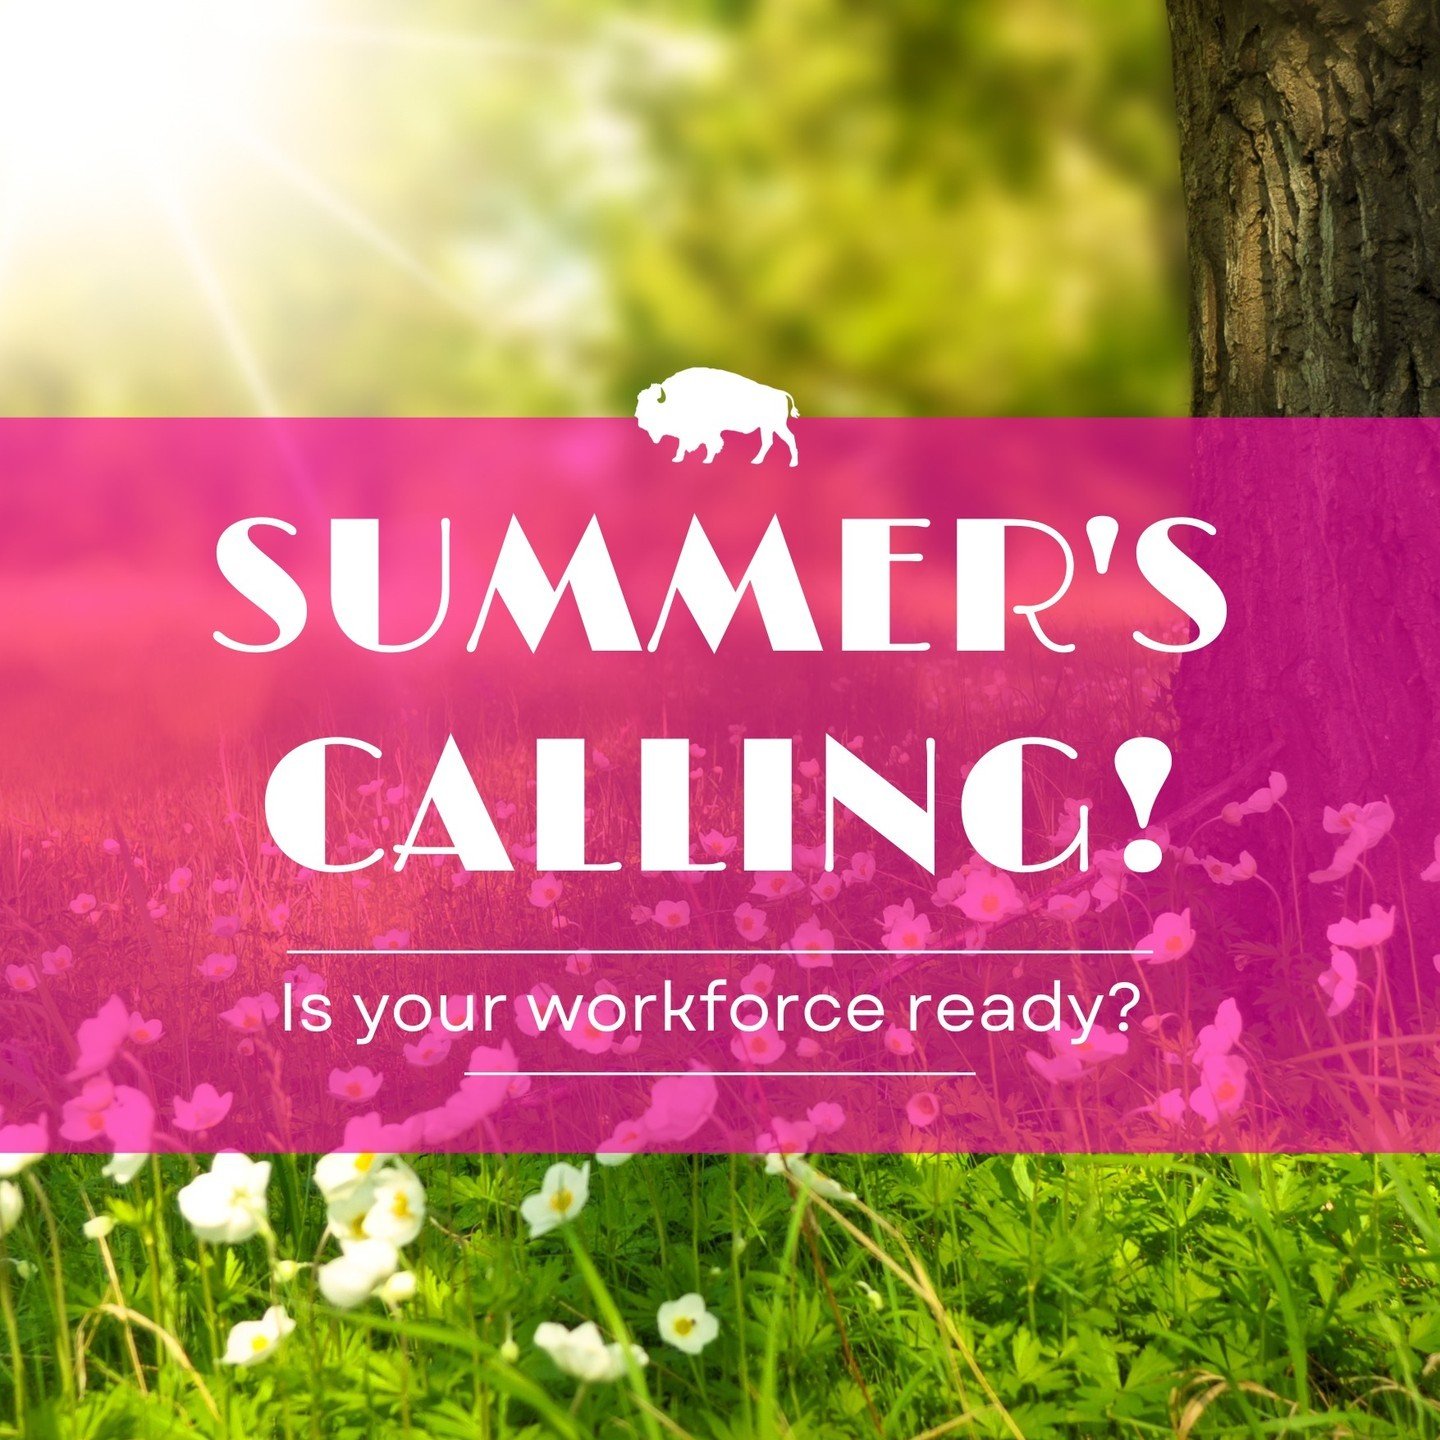 Don't sweat the seasonal rush! ☀️

@StaffBuffalo is here to help you find the right people to keep your business booming this summer. We believe in the power of listening to understand your unique needs and culture, ensuring the right match so that y